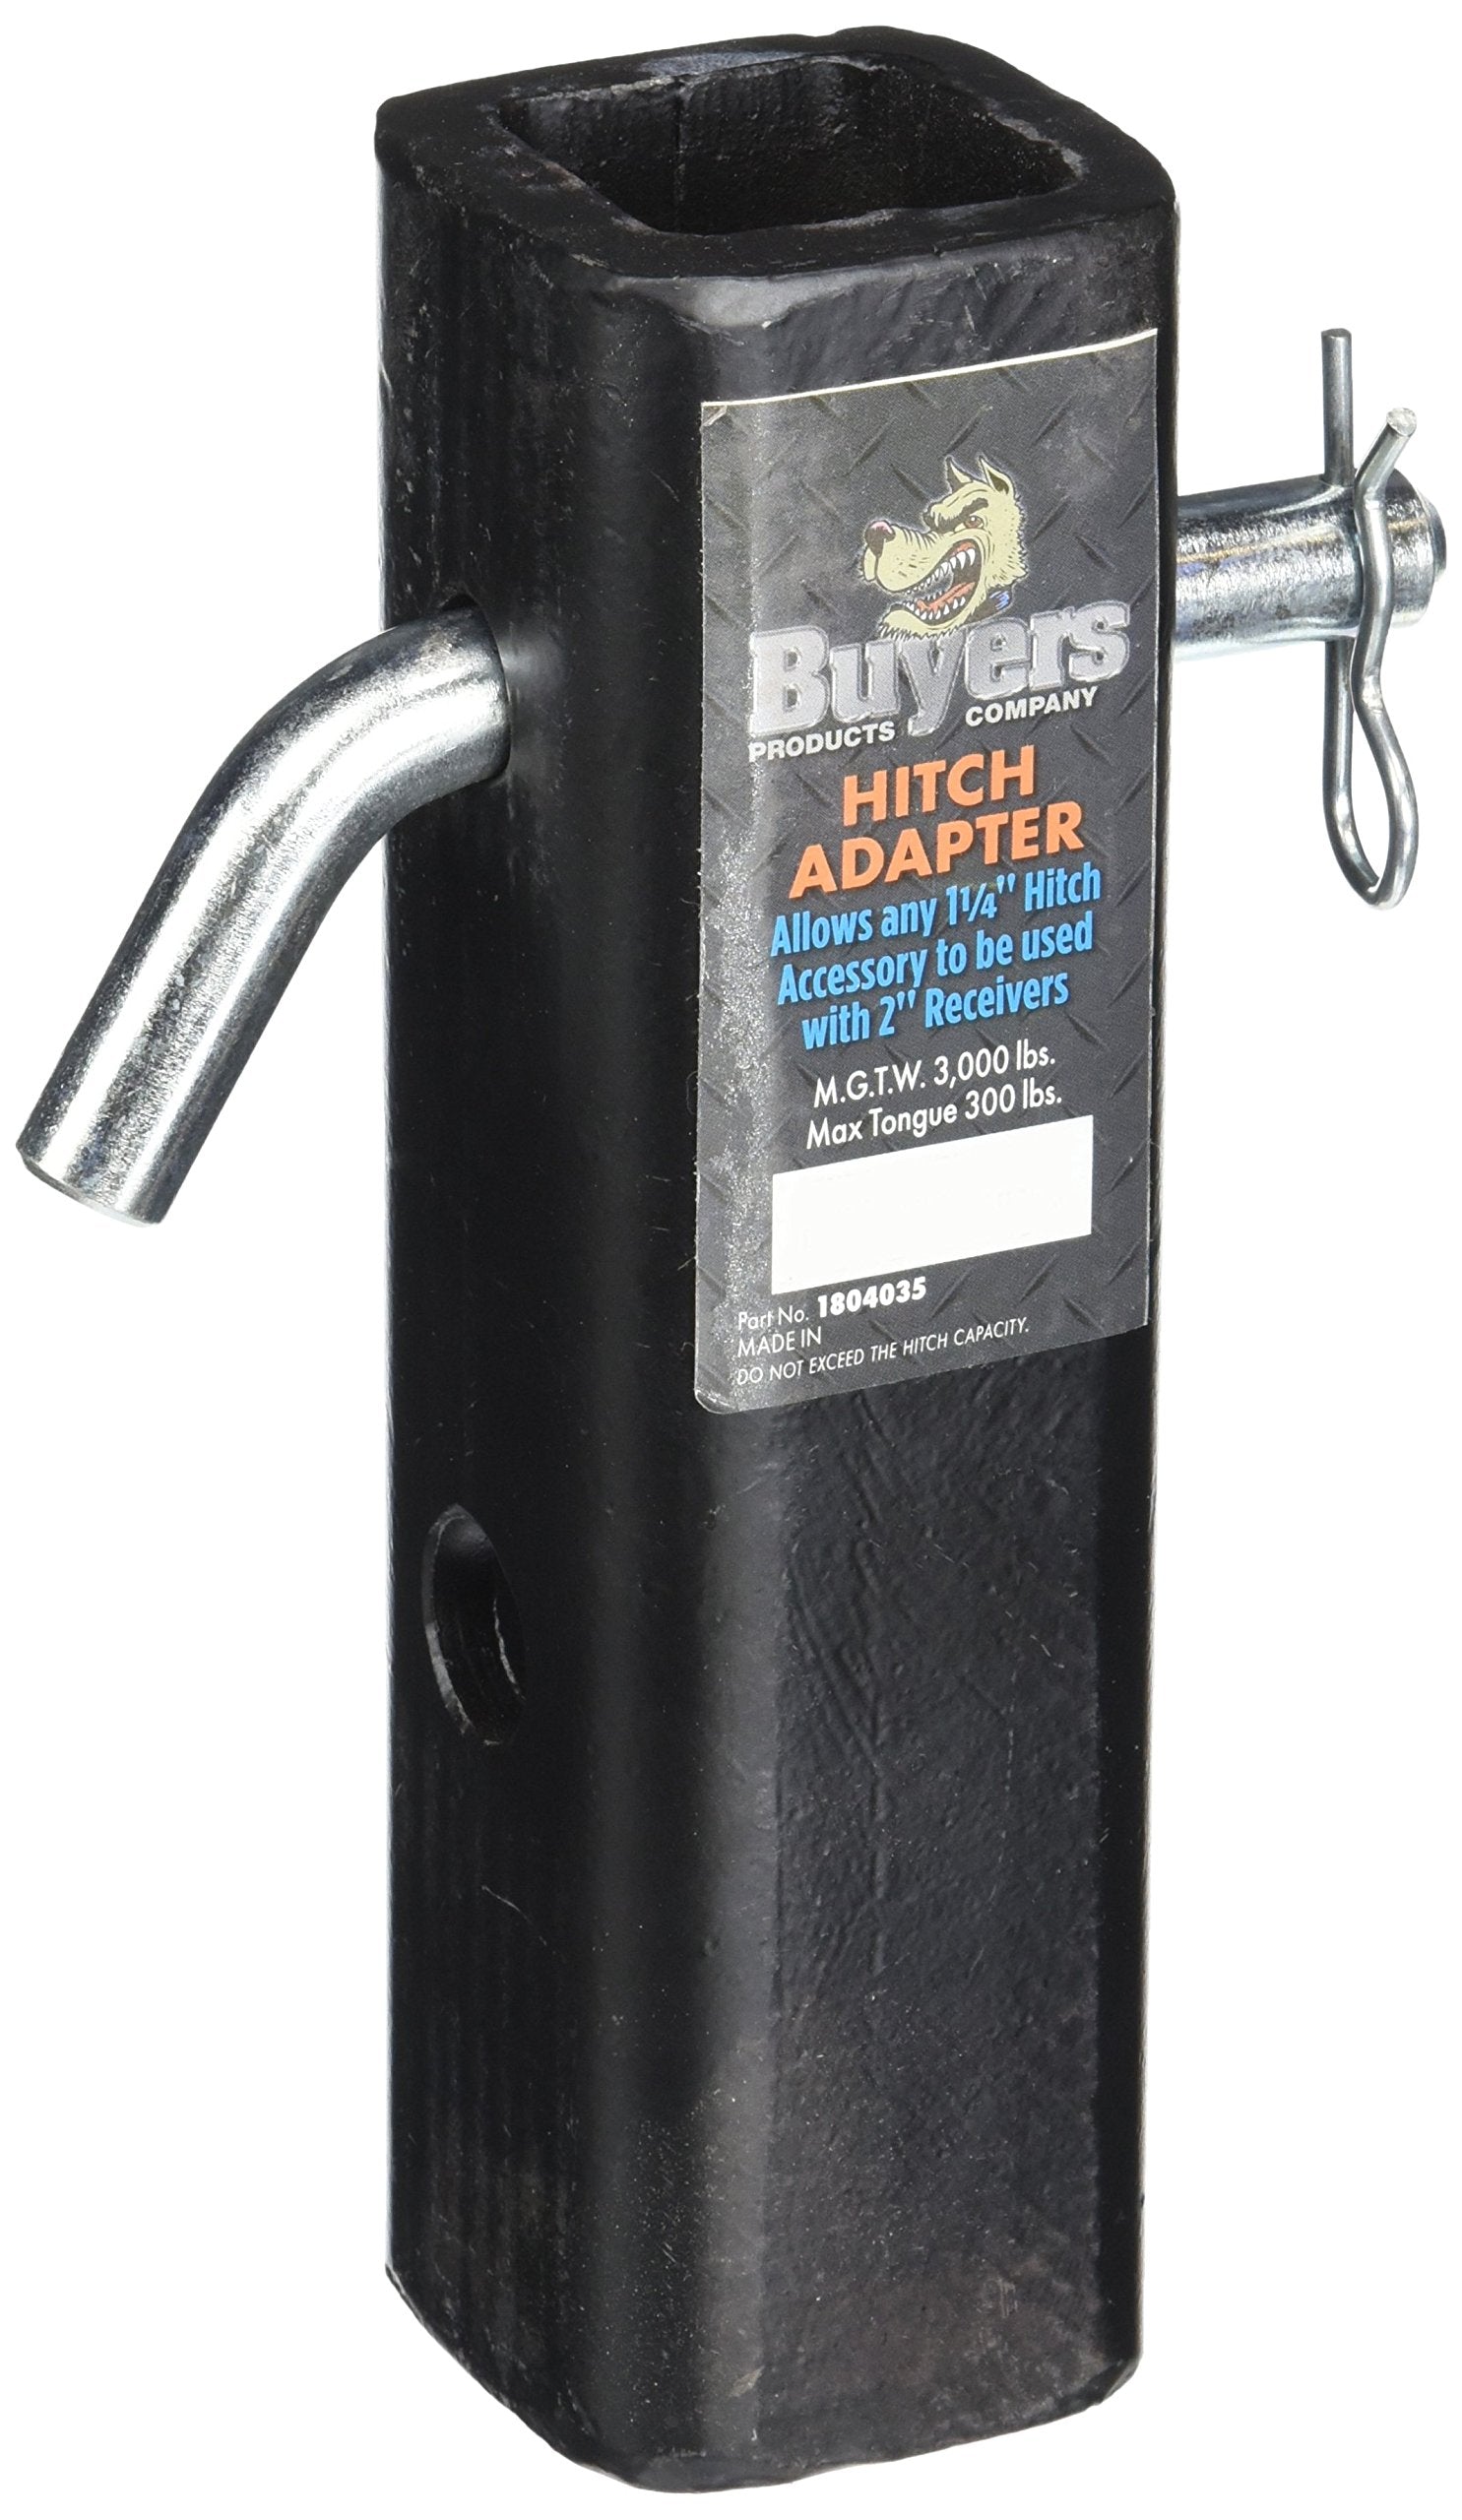 Buyers Products 1804035 2" to 1-1/4" Hitch Adapter